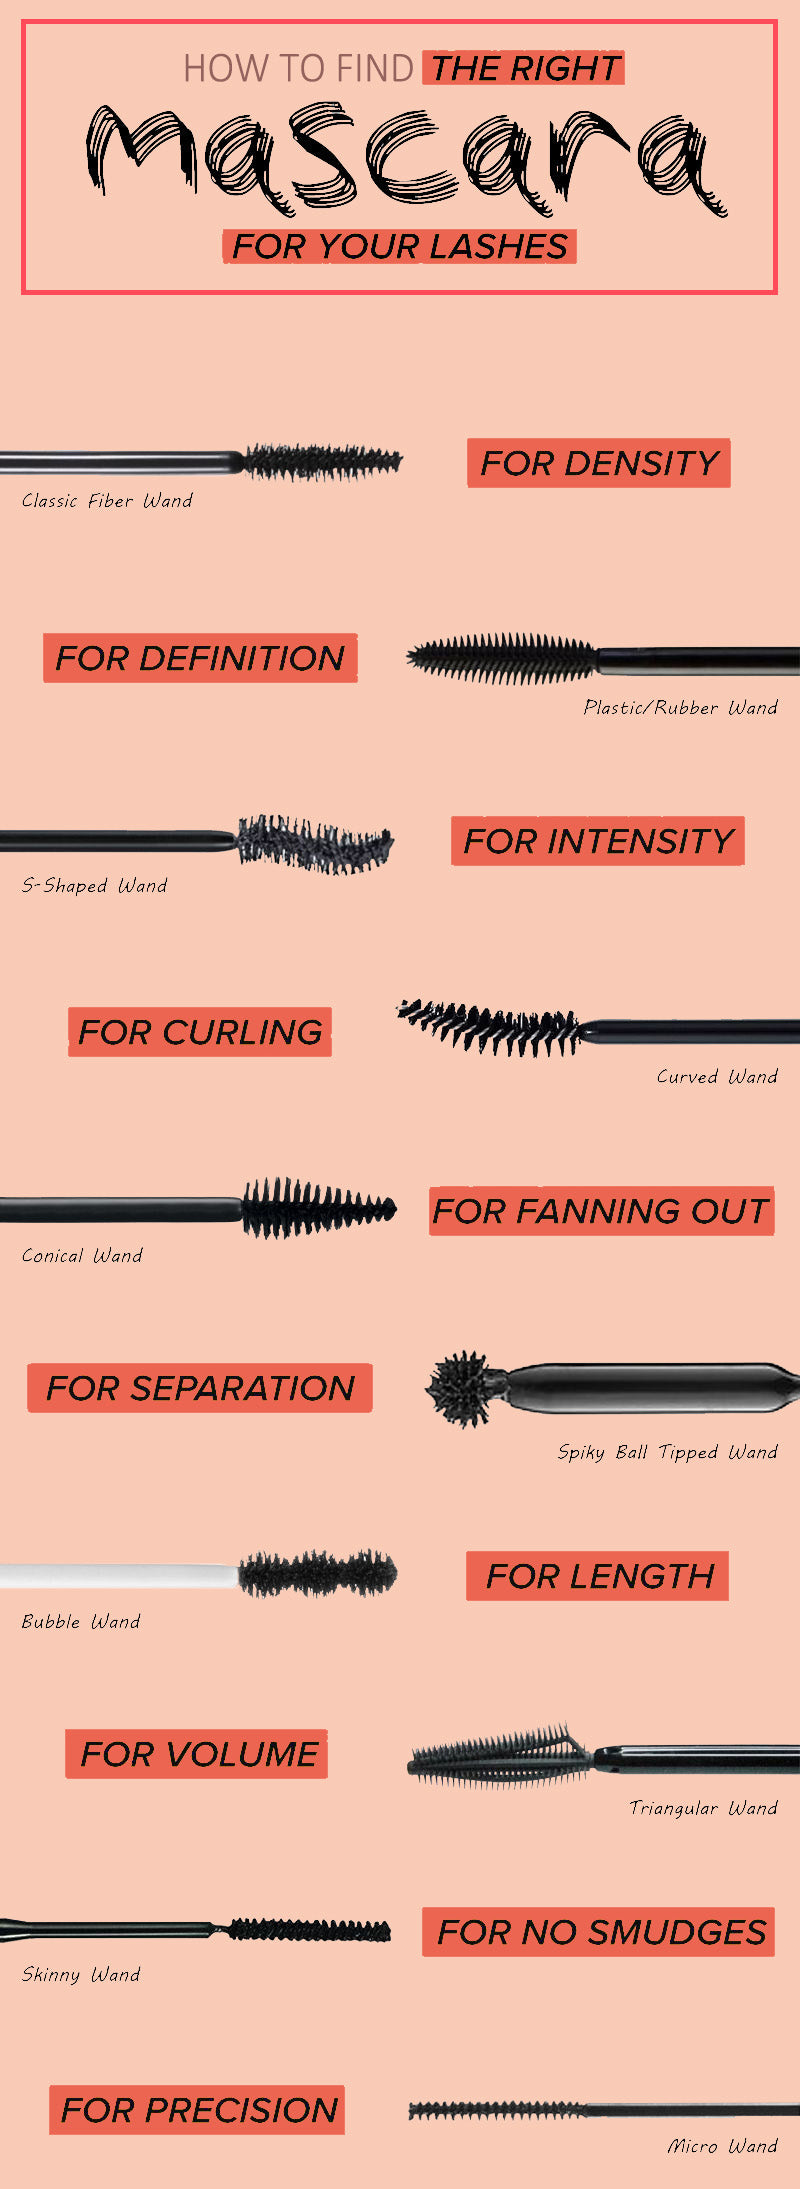 How to Find the Right Mascara for Your Lashes